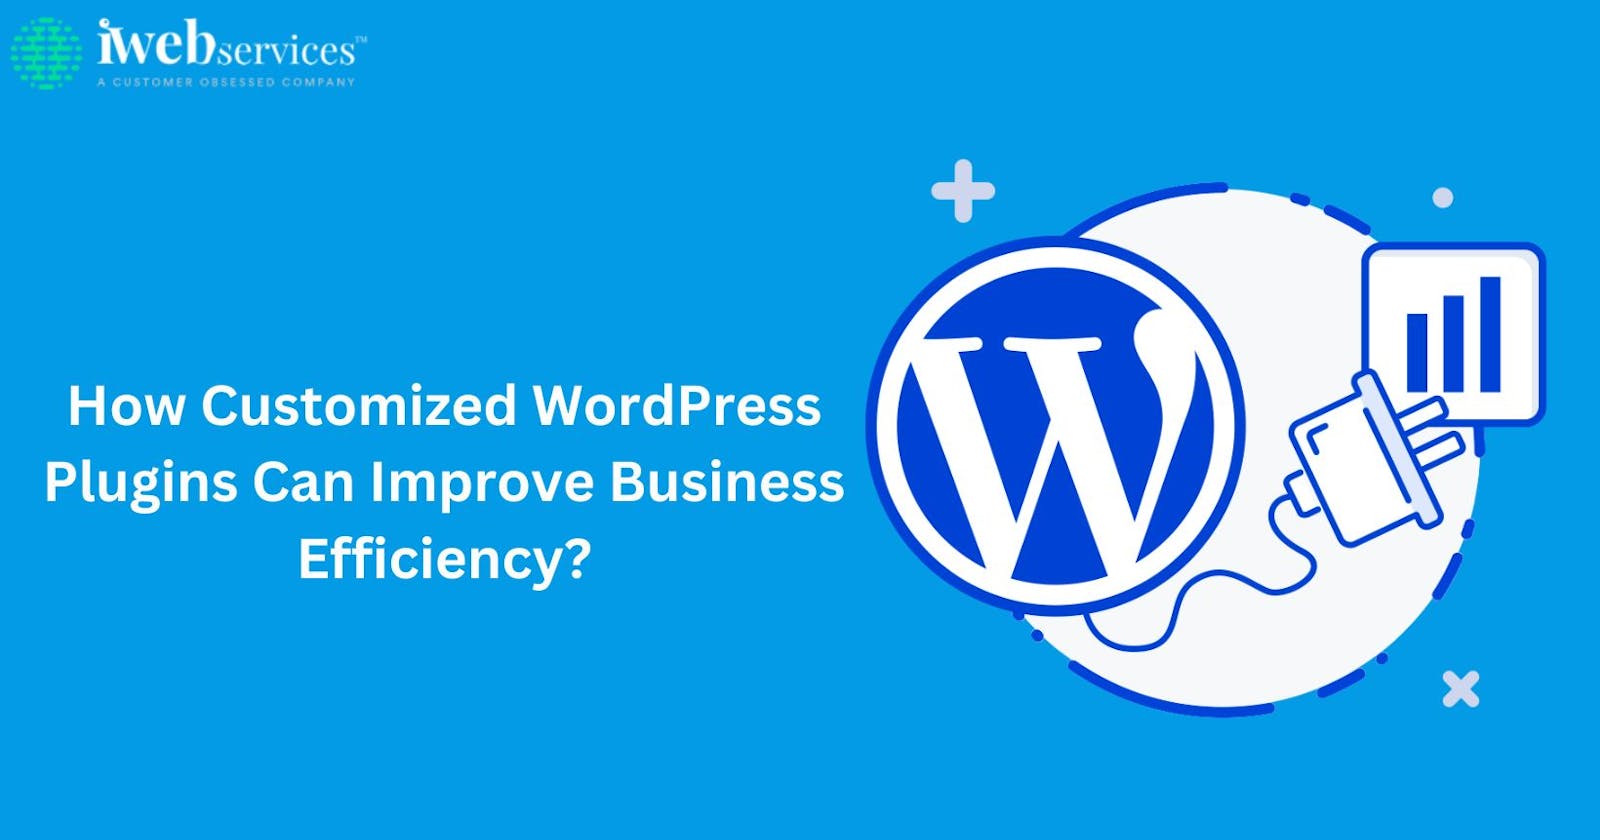 How Customized WordPress Plugins Can Improve Business Efficiency?